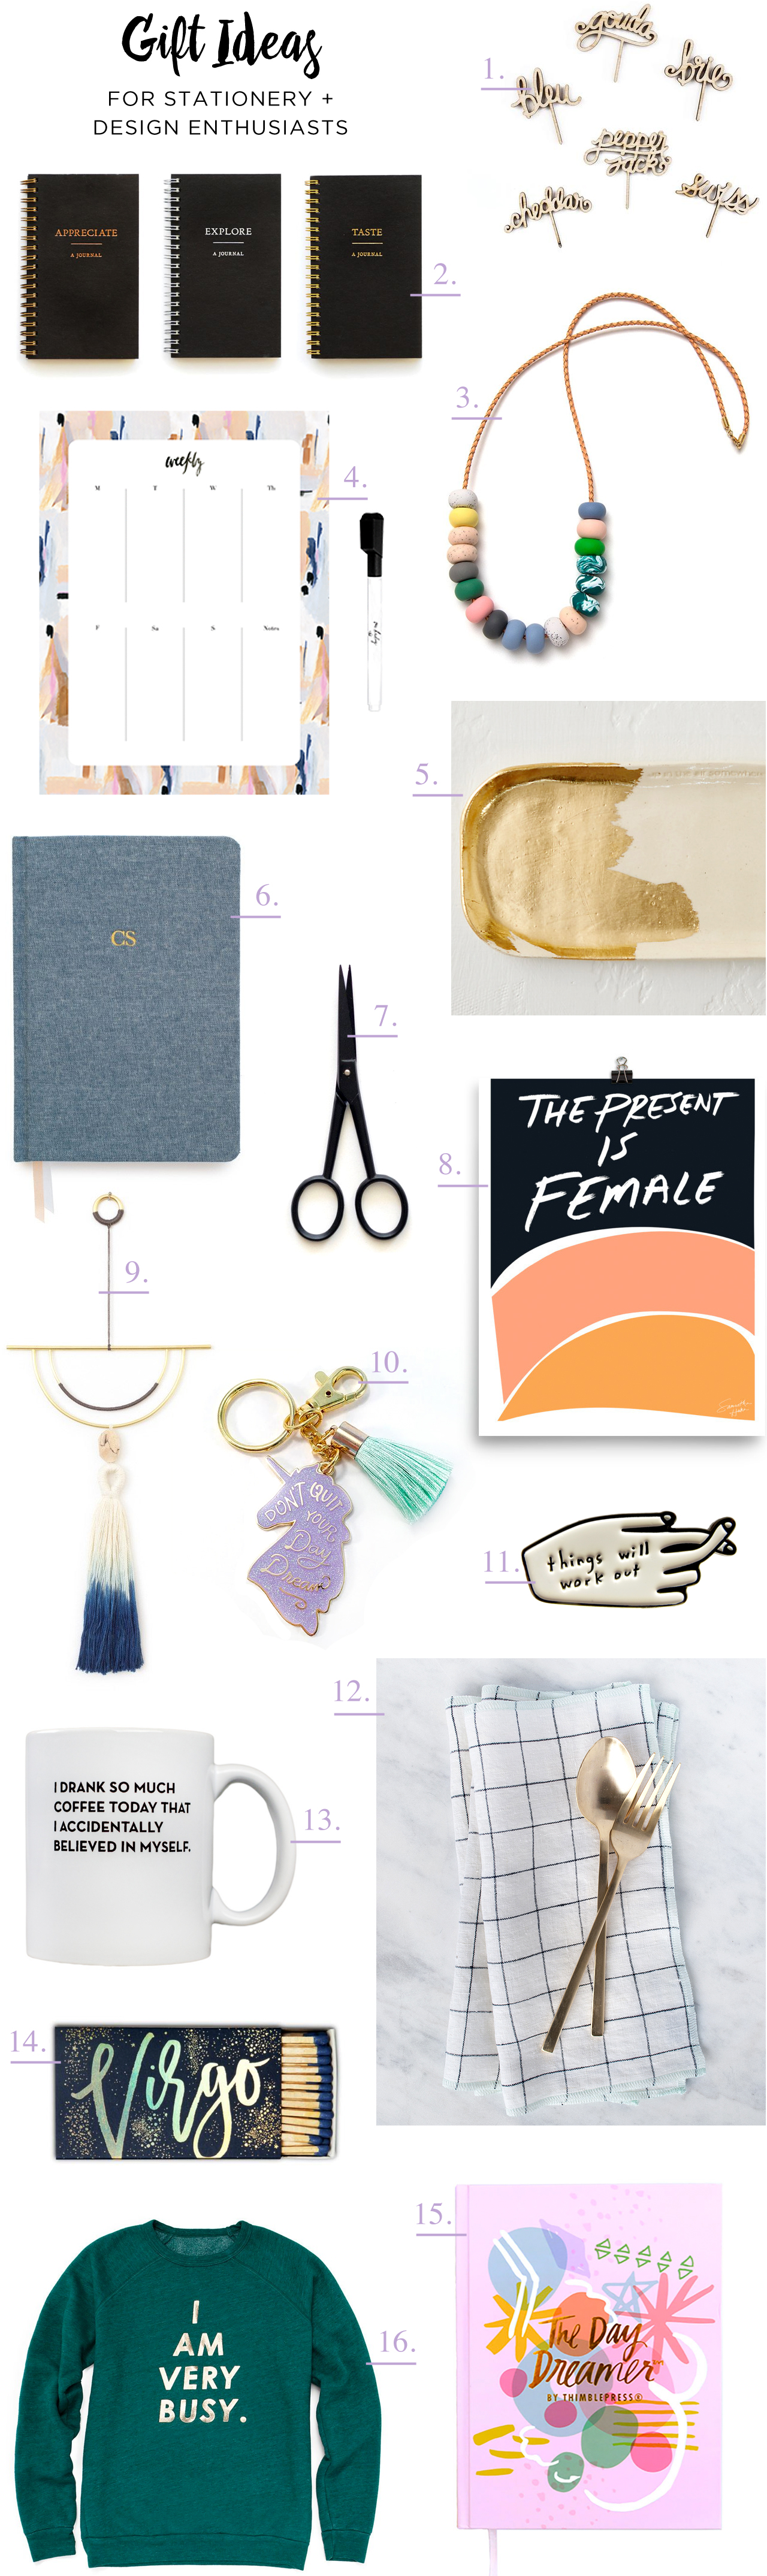 2016 Gift Guide: Gift Ideas for Stationery and Design Enthusiasts